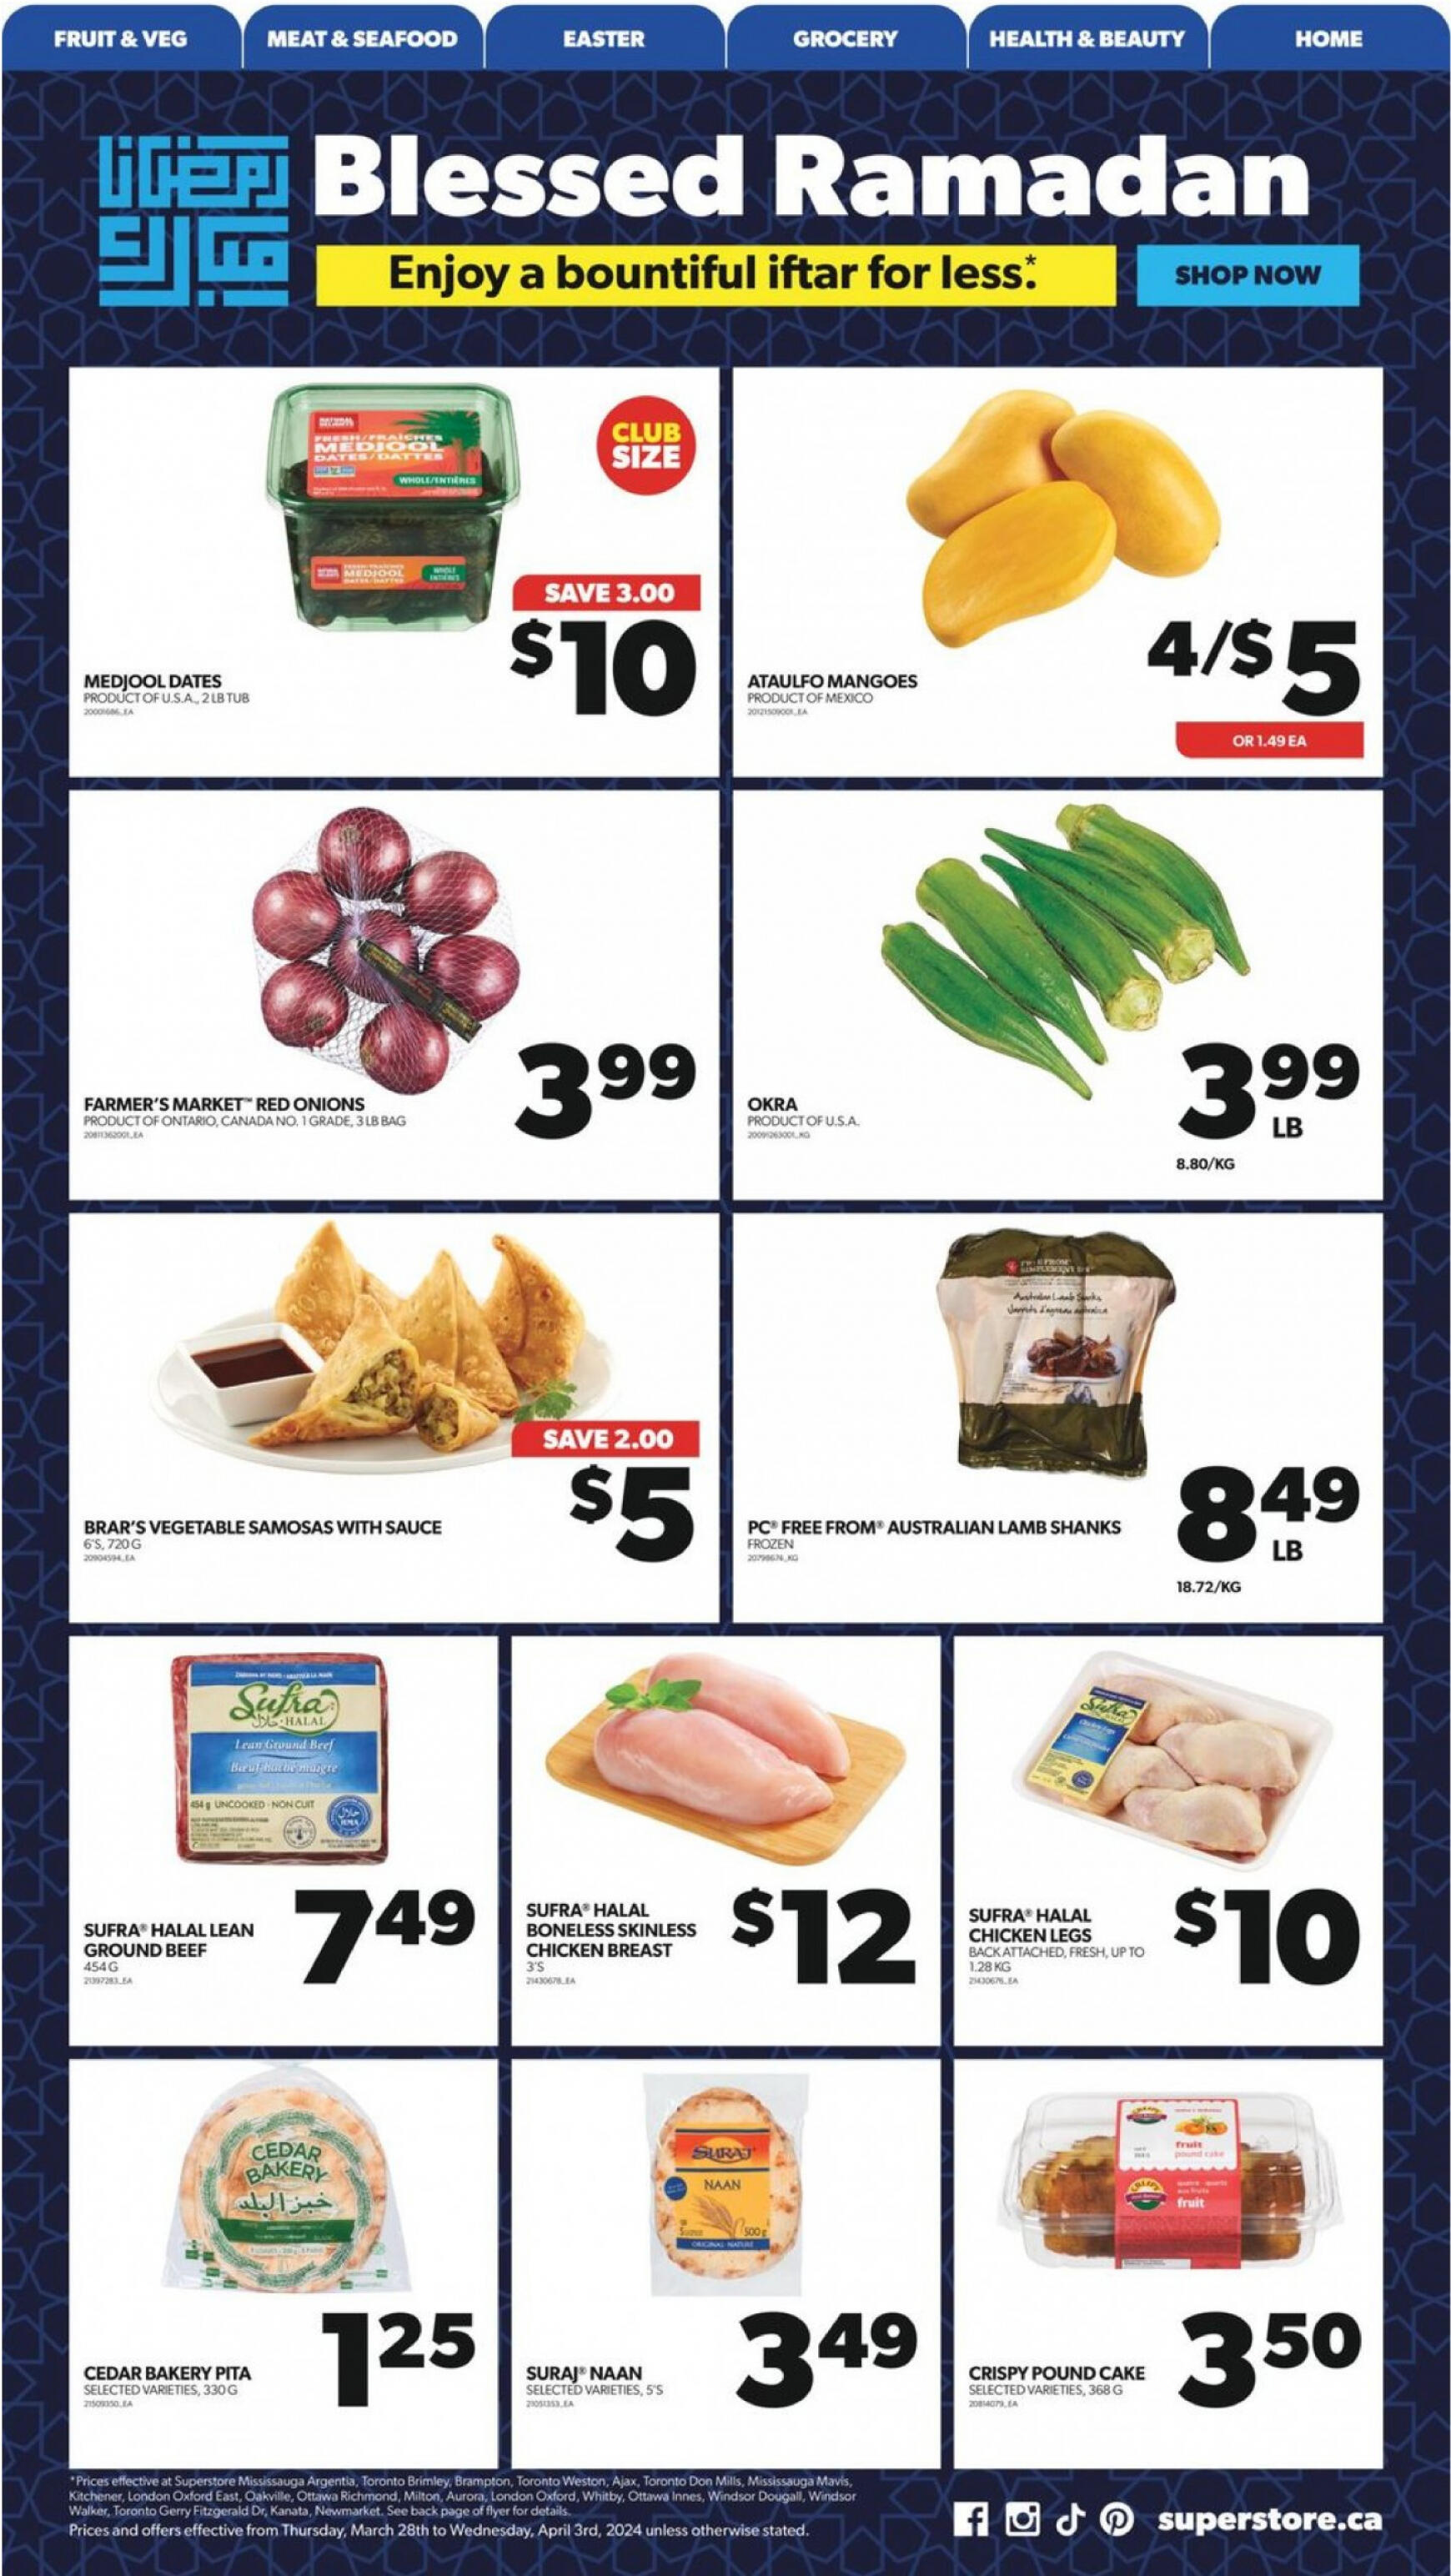 real-canadian-superstore - Real Canadian Superstore flyer current 28.03. - 03.04. - page: 32